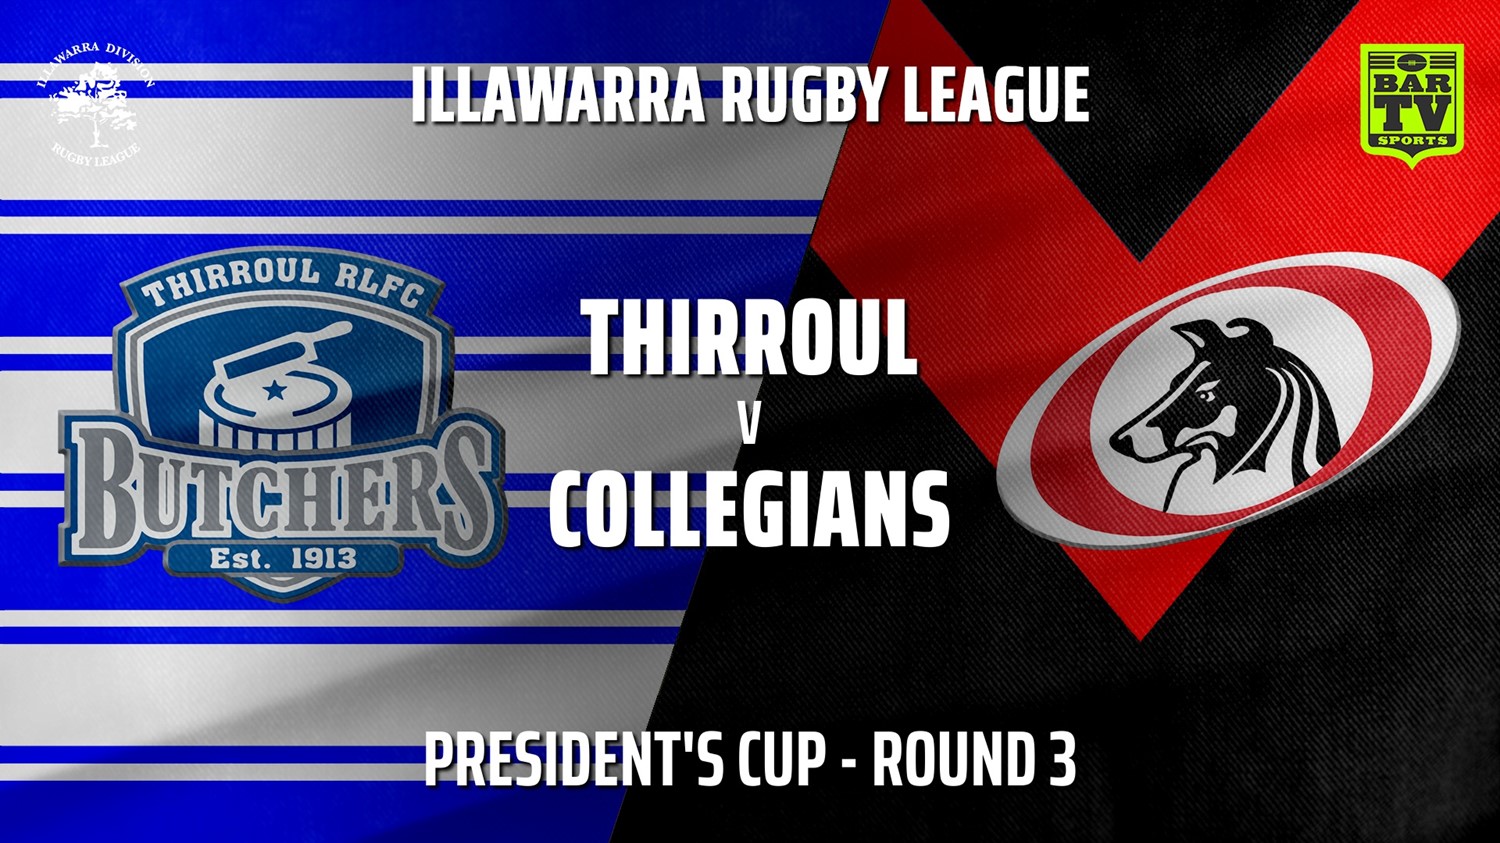 MINI GAME: IRL Round 3 - President's Cup - Thirroul Butchers v Collegians Slate Image